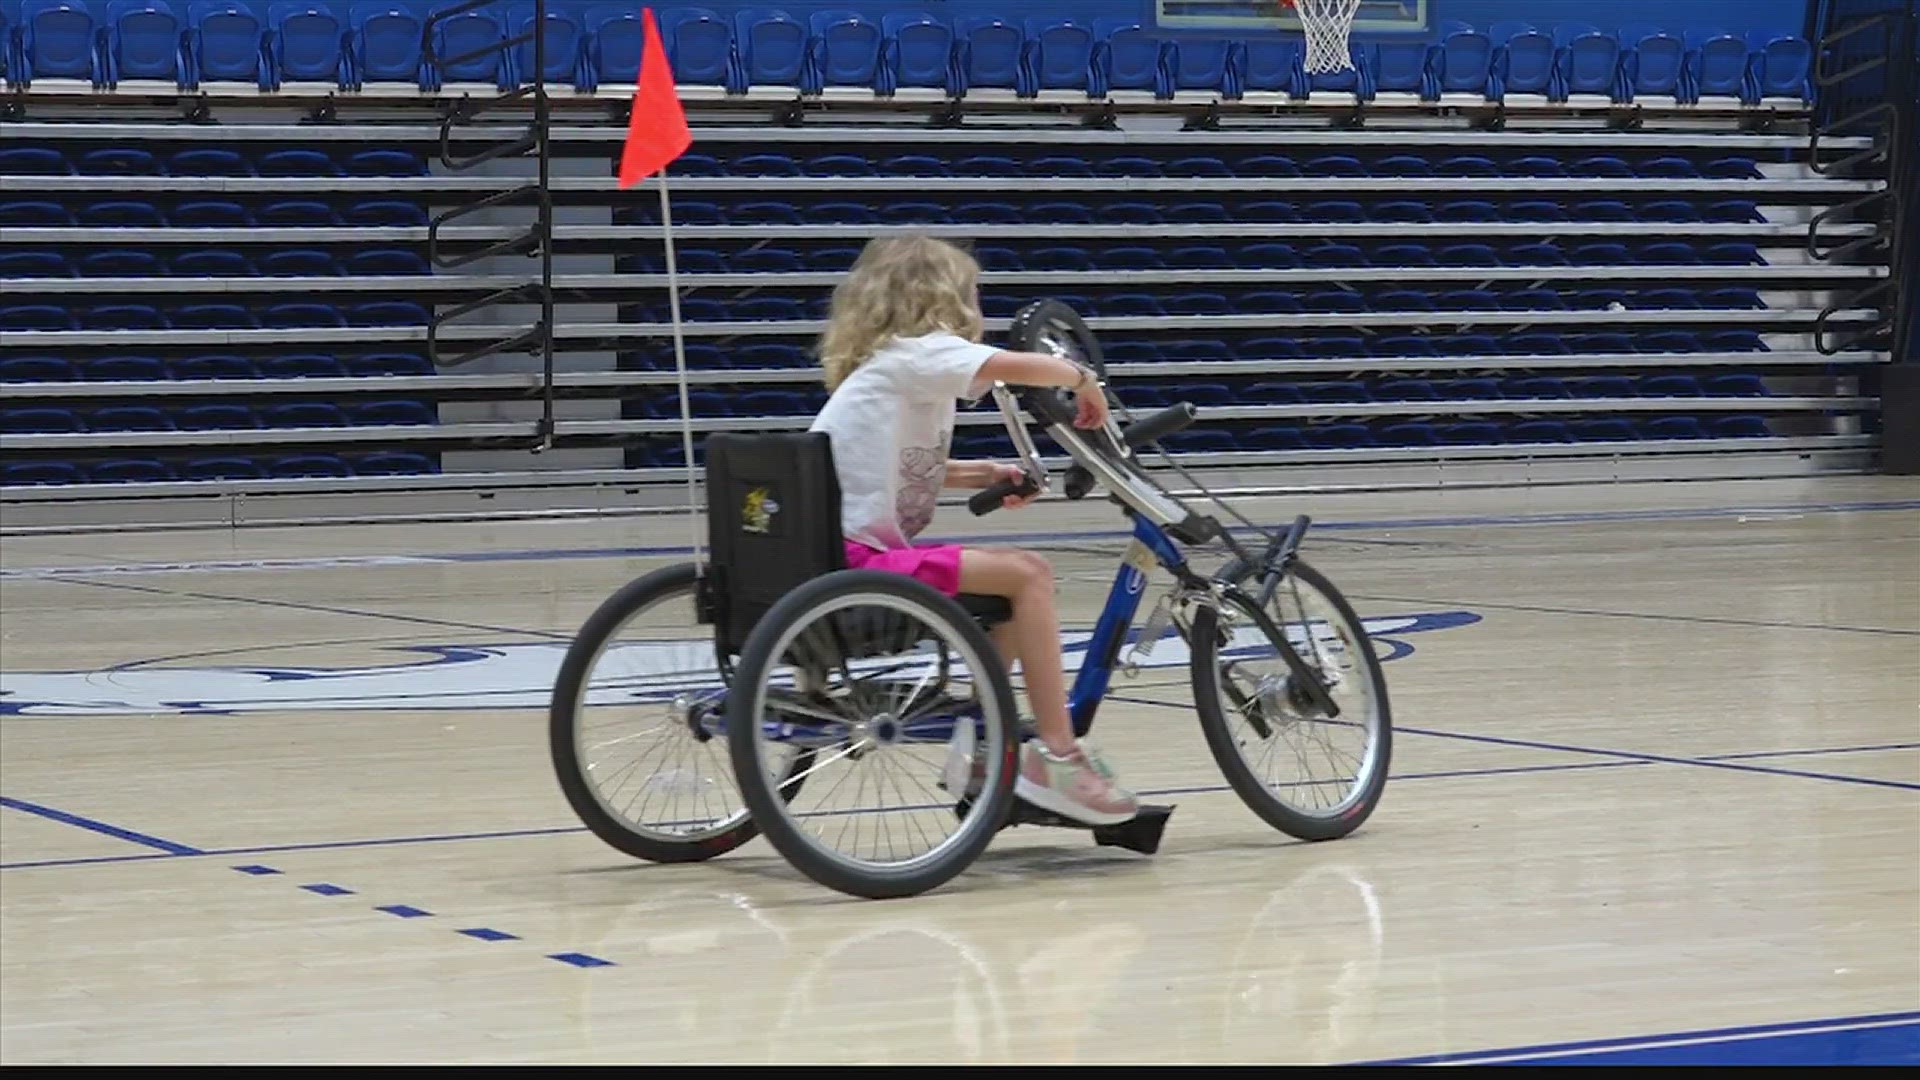 A weekend seminar at UAH comes just days before the Para-Cycling World Cup makes its Huntsville debut.